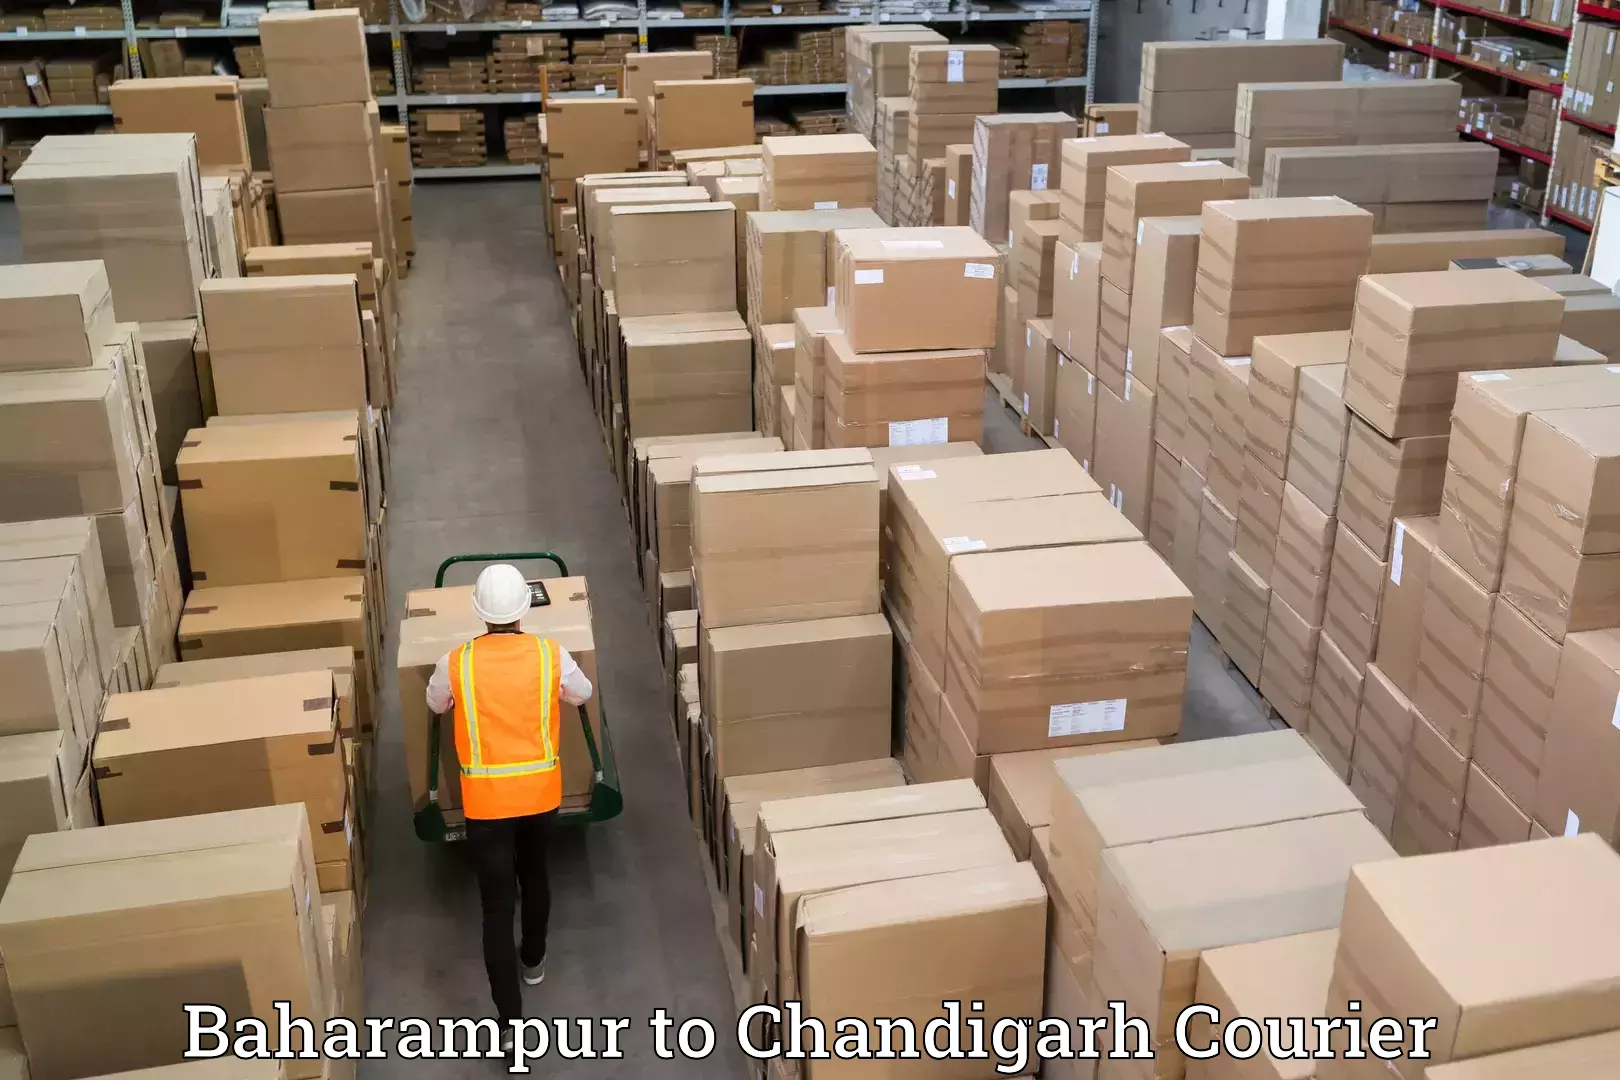 Moving and packing experts Baharampur to Chandigarh